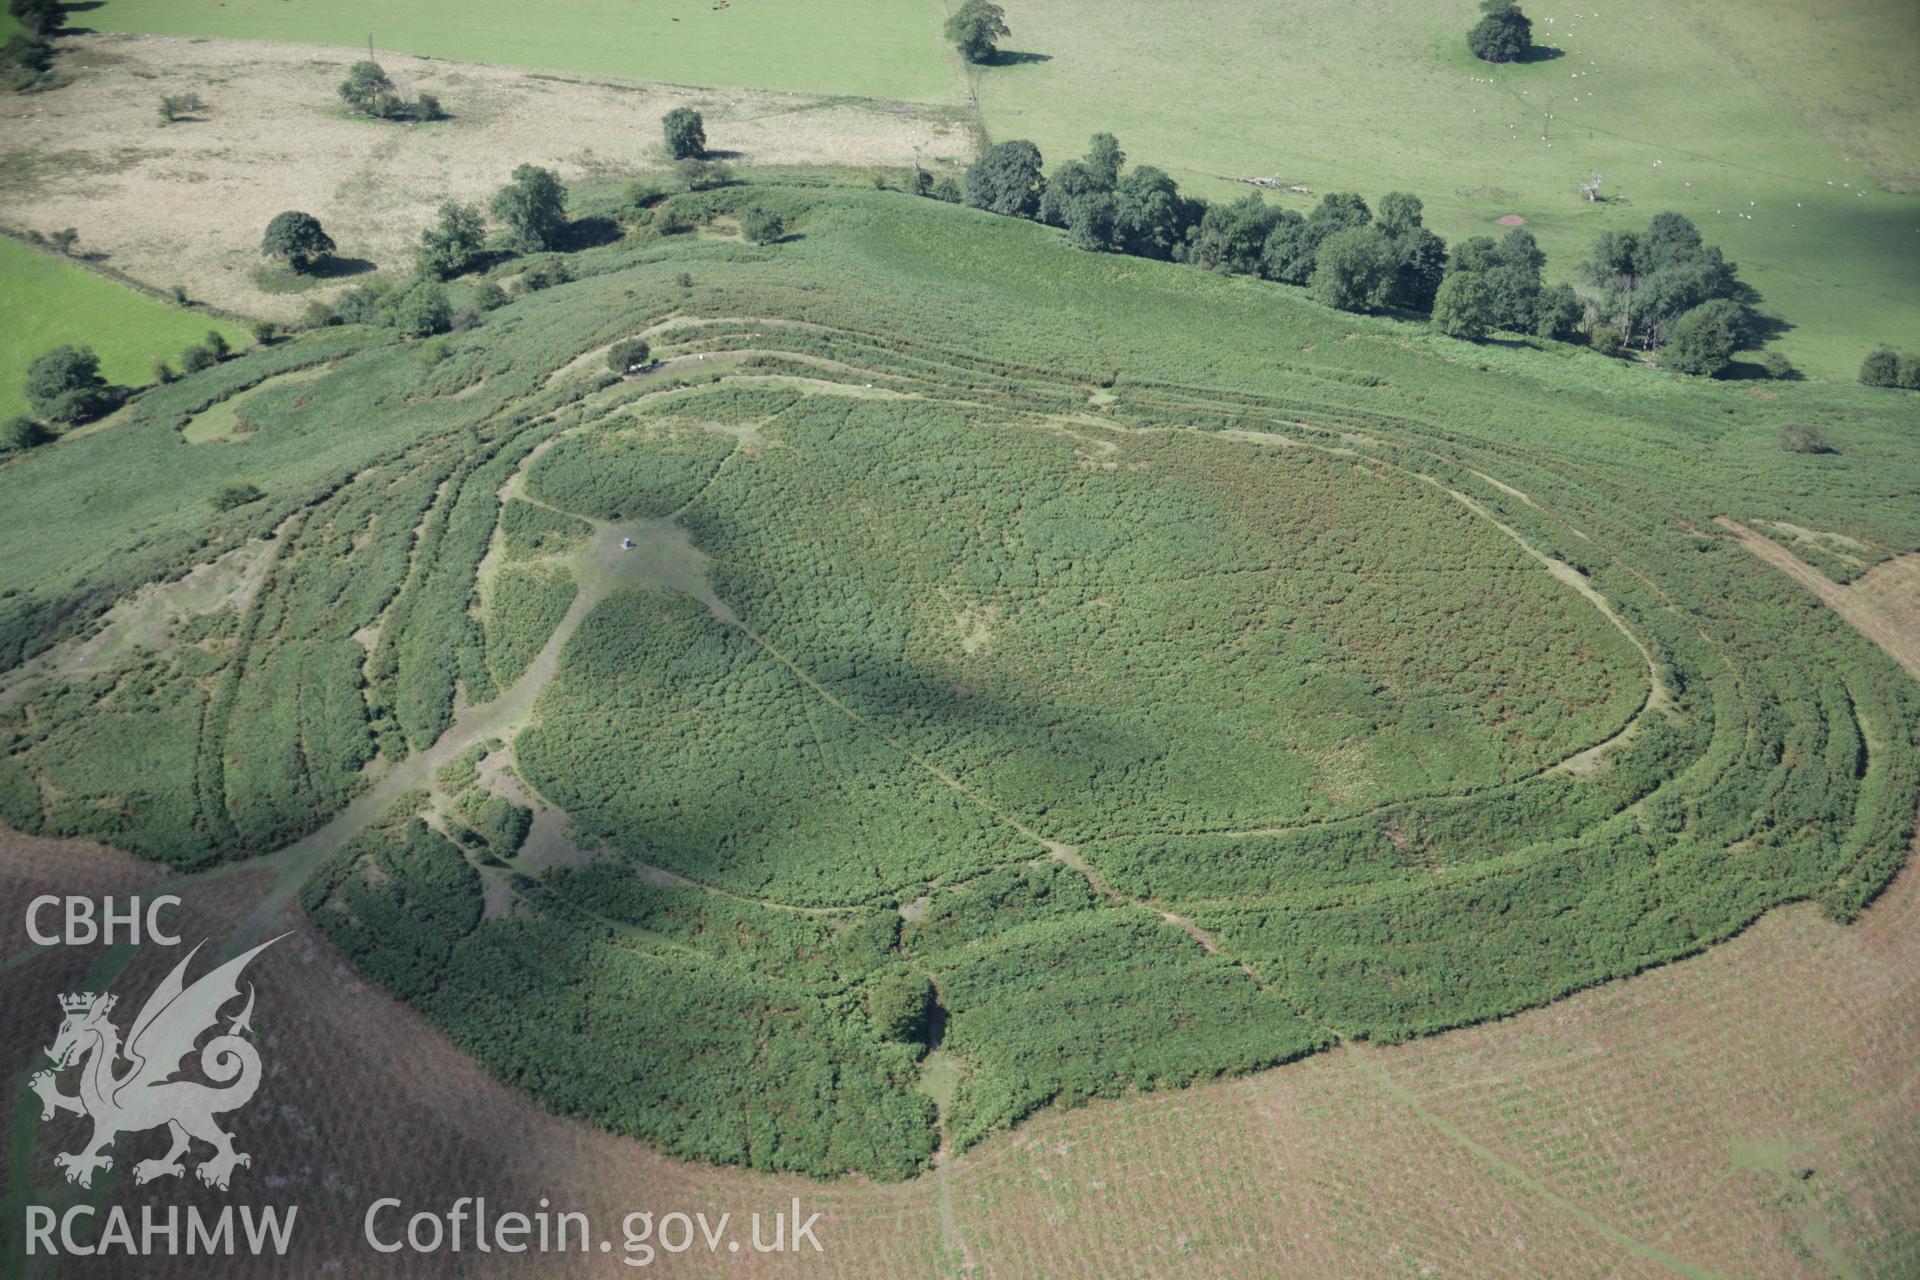 RCAHMW colour oblique aerial photograph of Pen-y-crug hillfort, Brecon. Taken on 02 September 2005 by Toby Driver